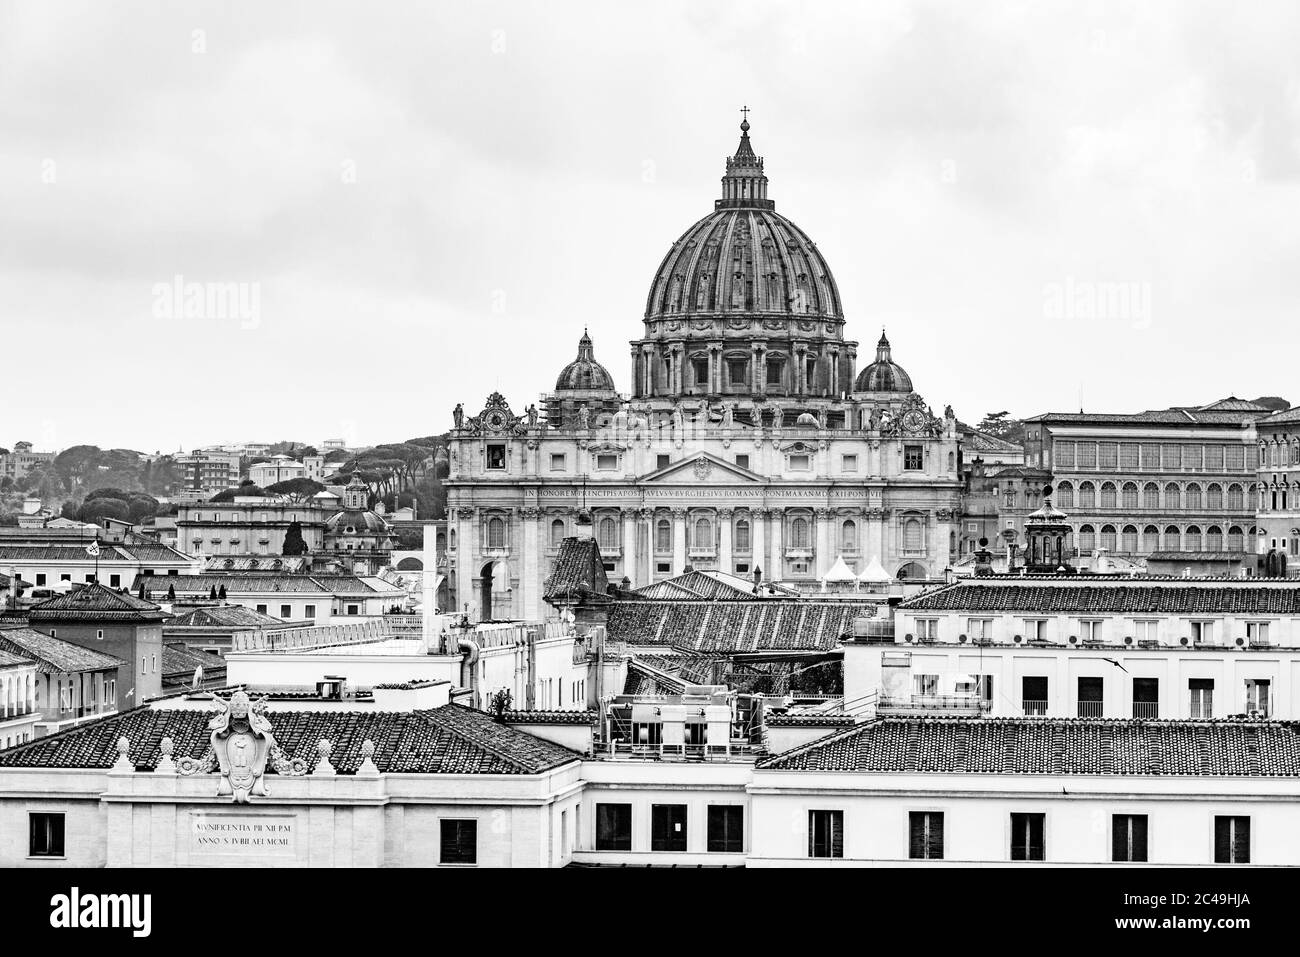 Vatican City with St. Peter's Basilica. Panoramic skyline view from Castel Sant'Angelo, Rome, Italy. Black and white image. Stock Photo